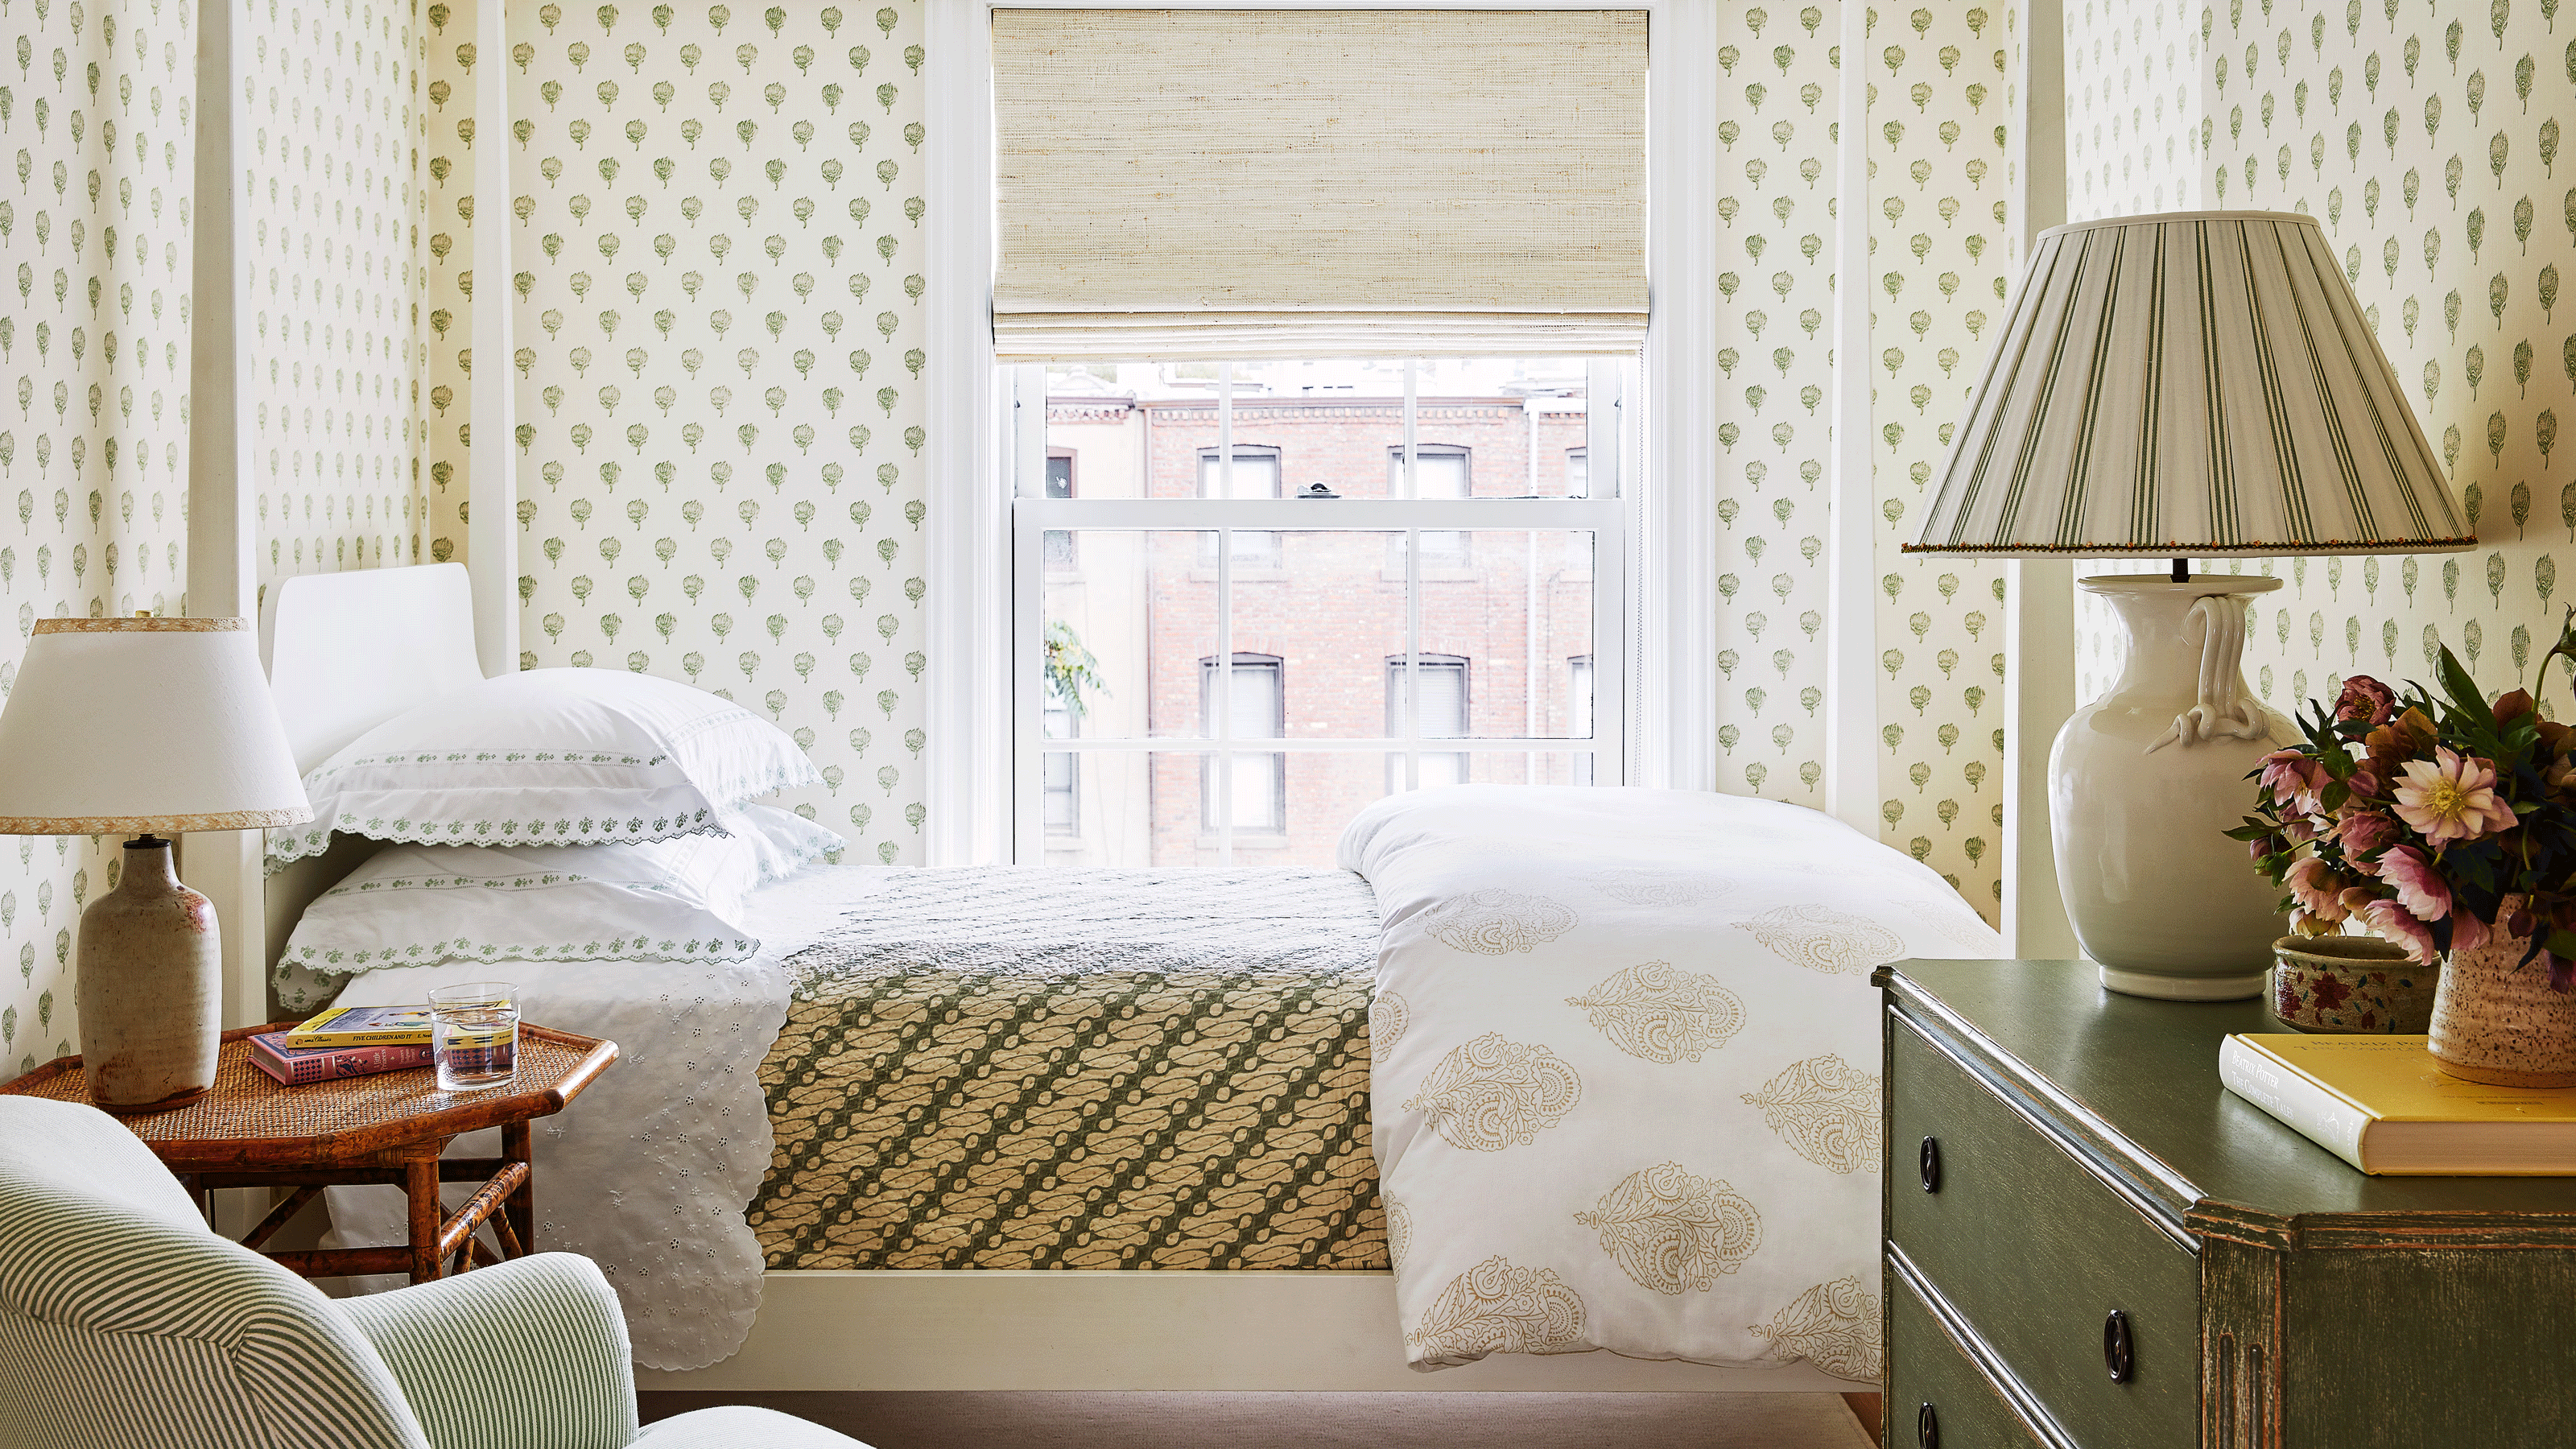 small bedroom with patterned wallpaper and patterned bedding and furnishing